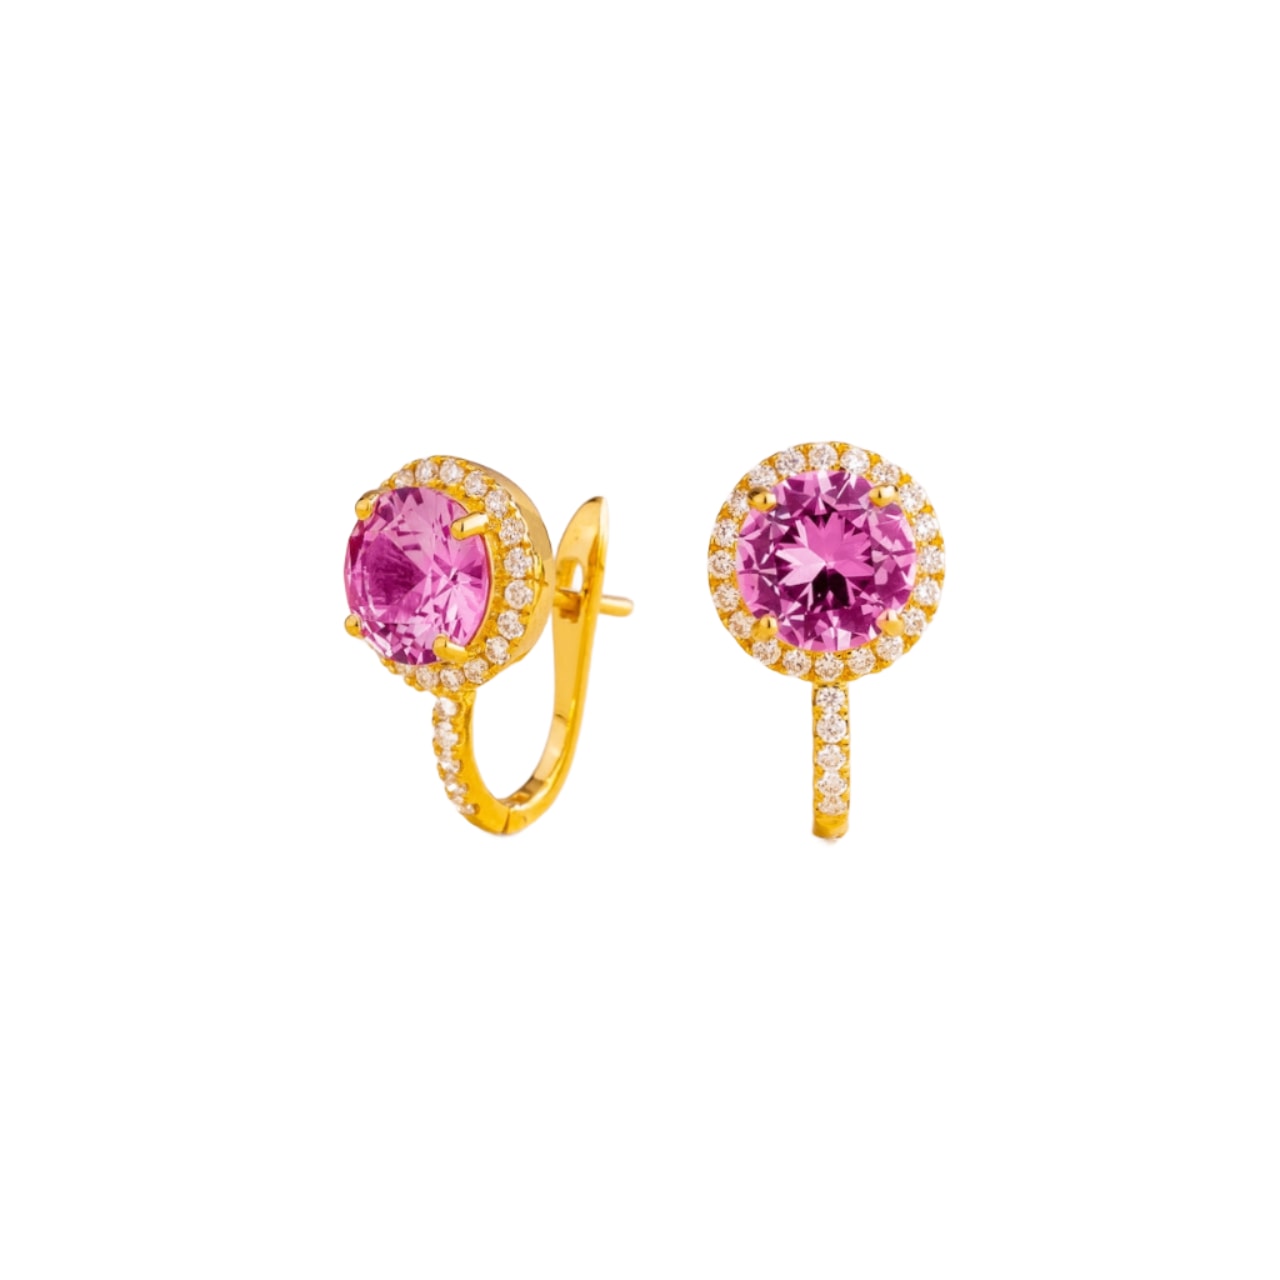 Juvetti Women's White / Gold / Pink Djerv Gold Earrings In Pink Sapphire & Diamond